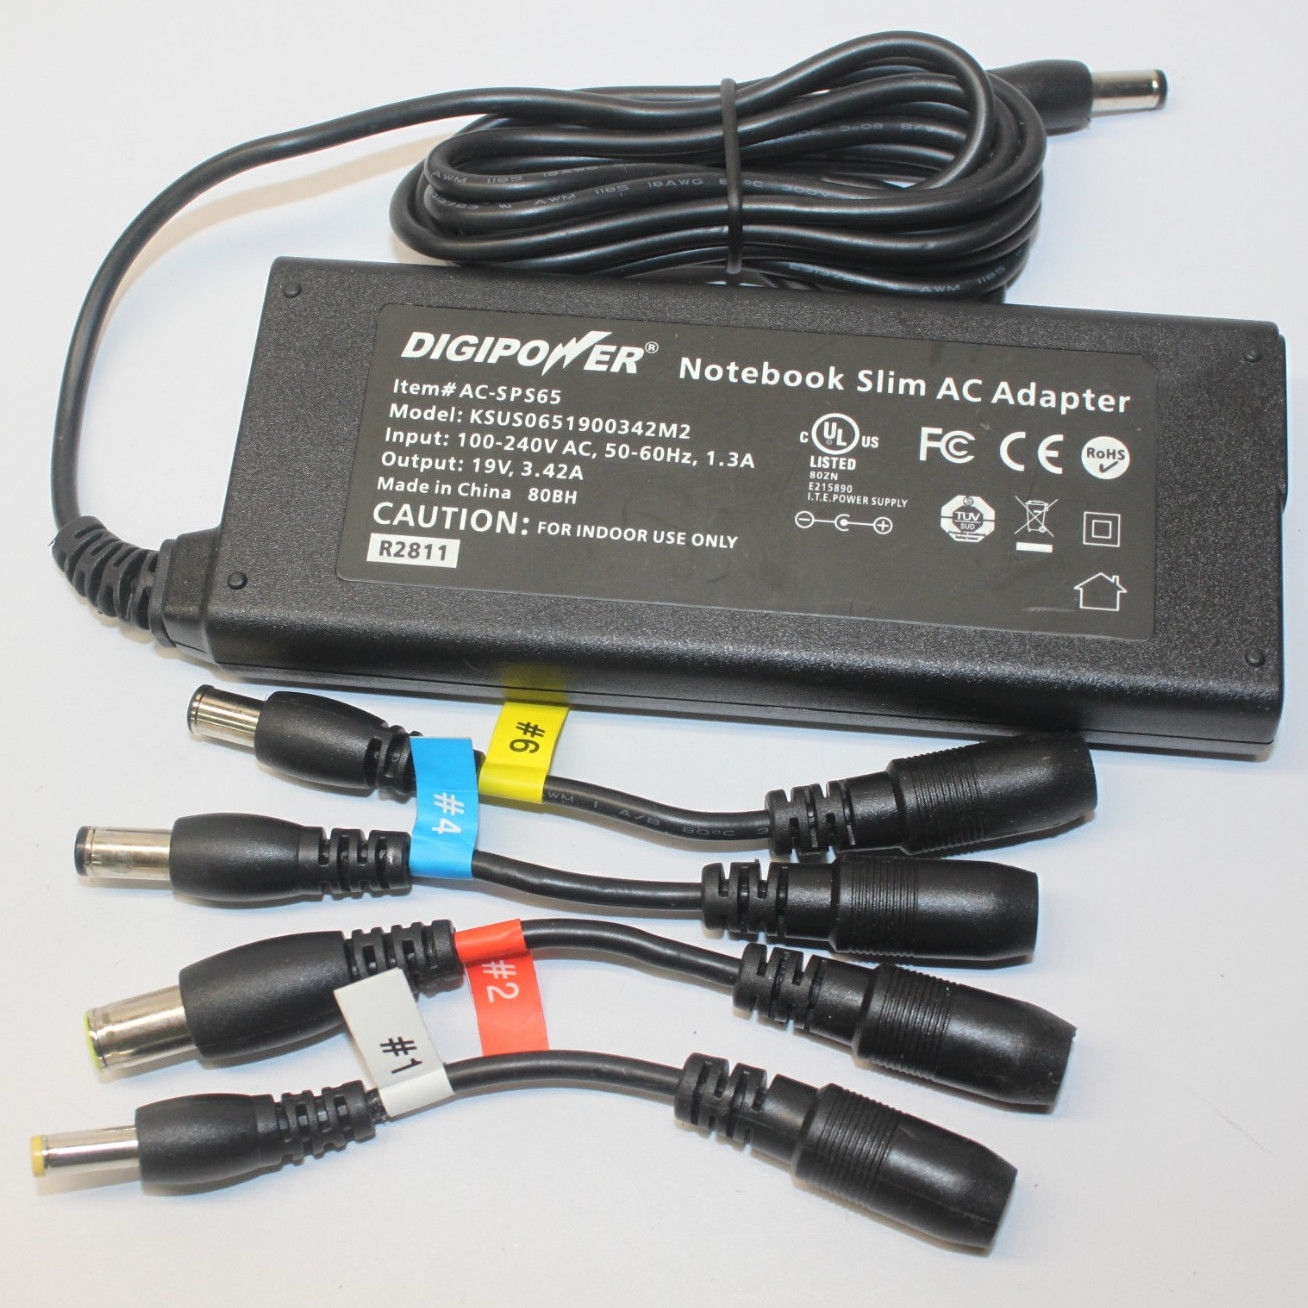 New 19V 3.42A DigiPower AC-SPS65 KSUS0651900342M2 Power Supply Ac Adapter - Click Image to Close